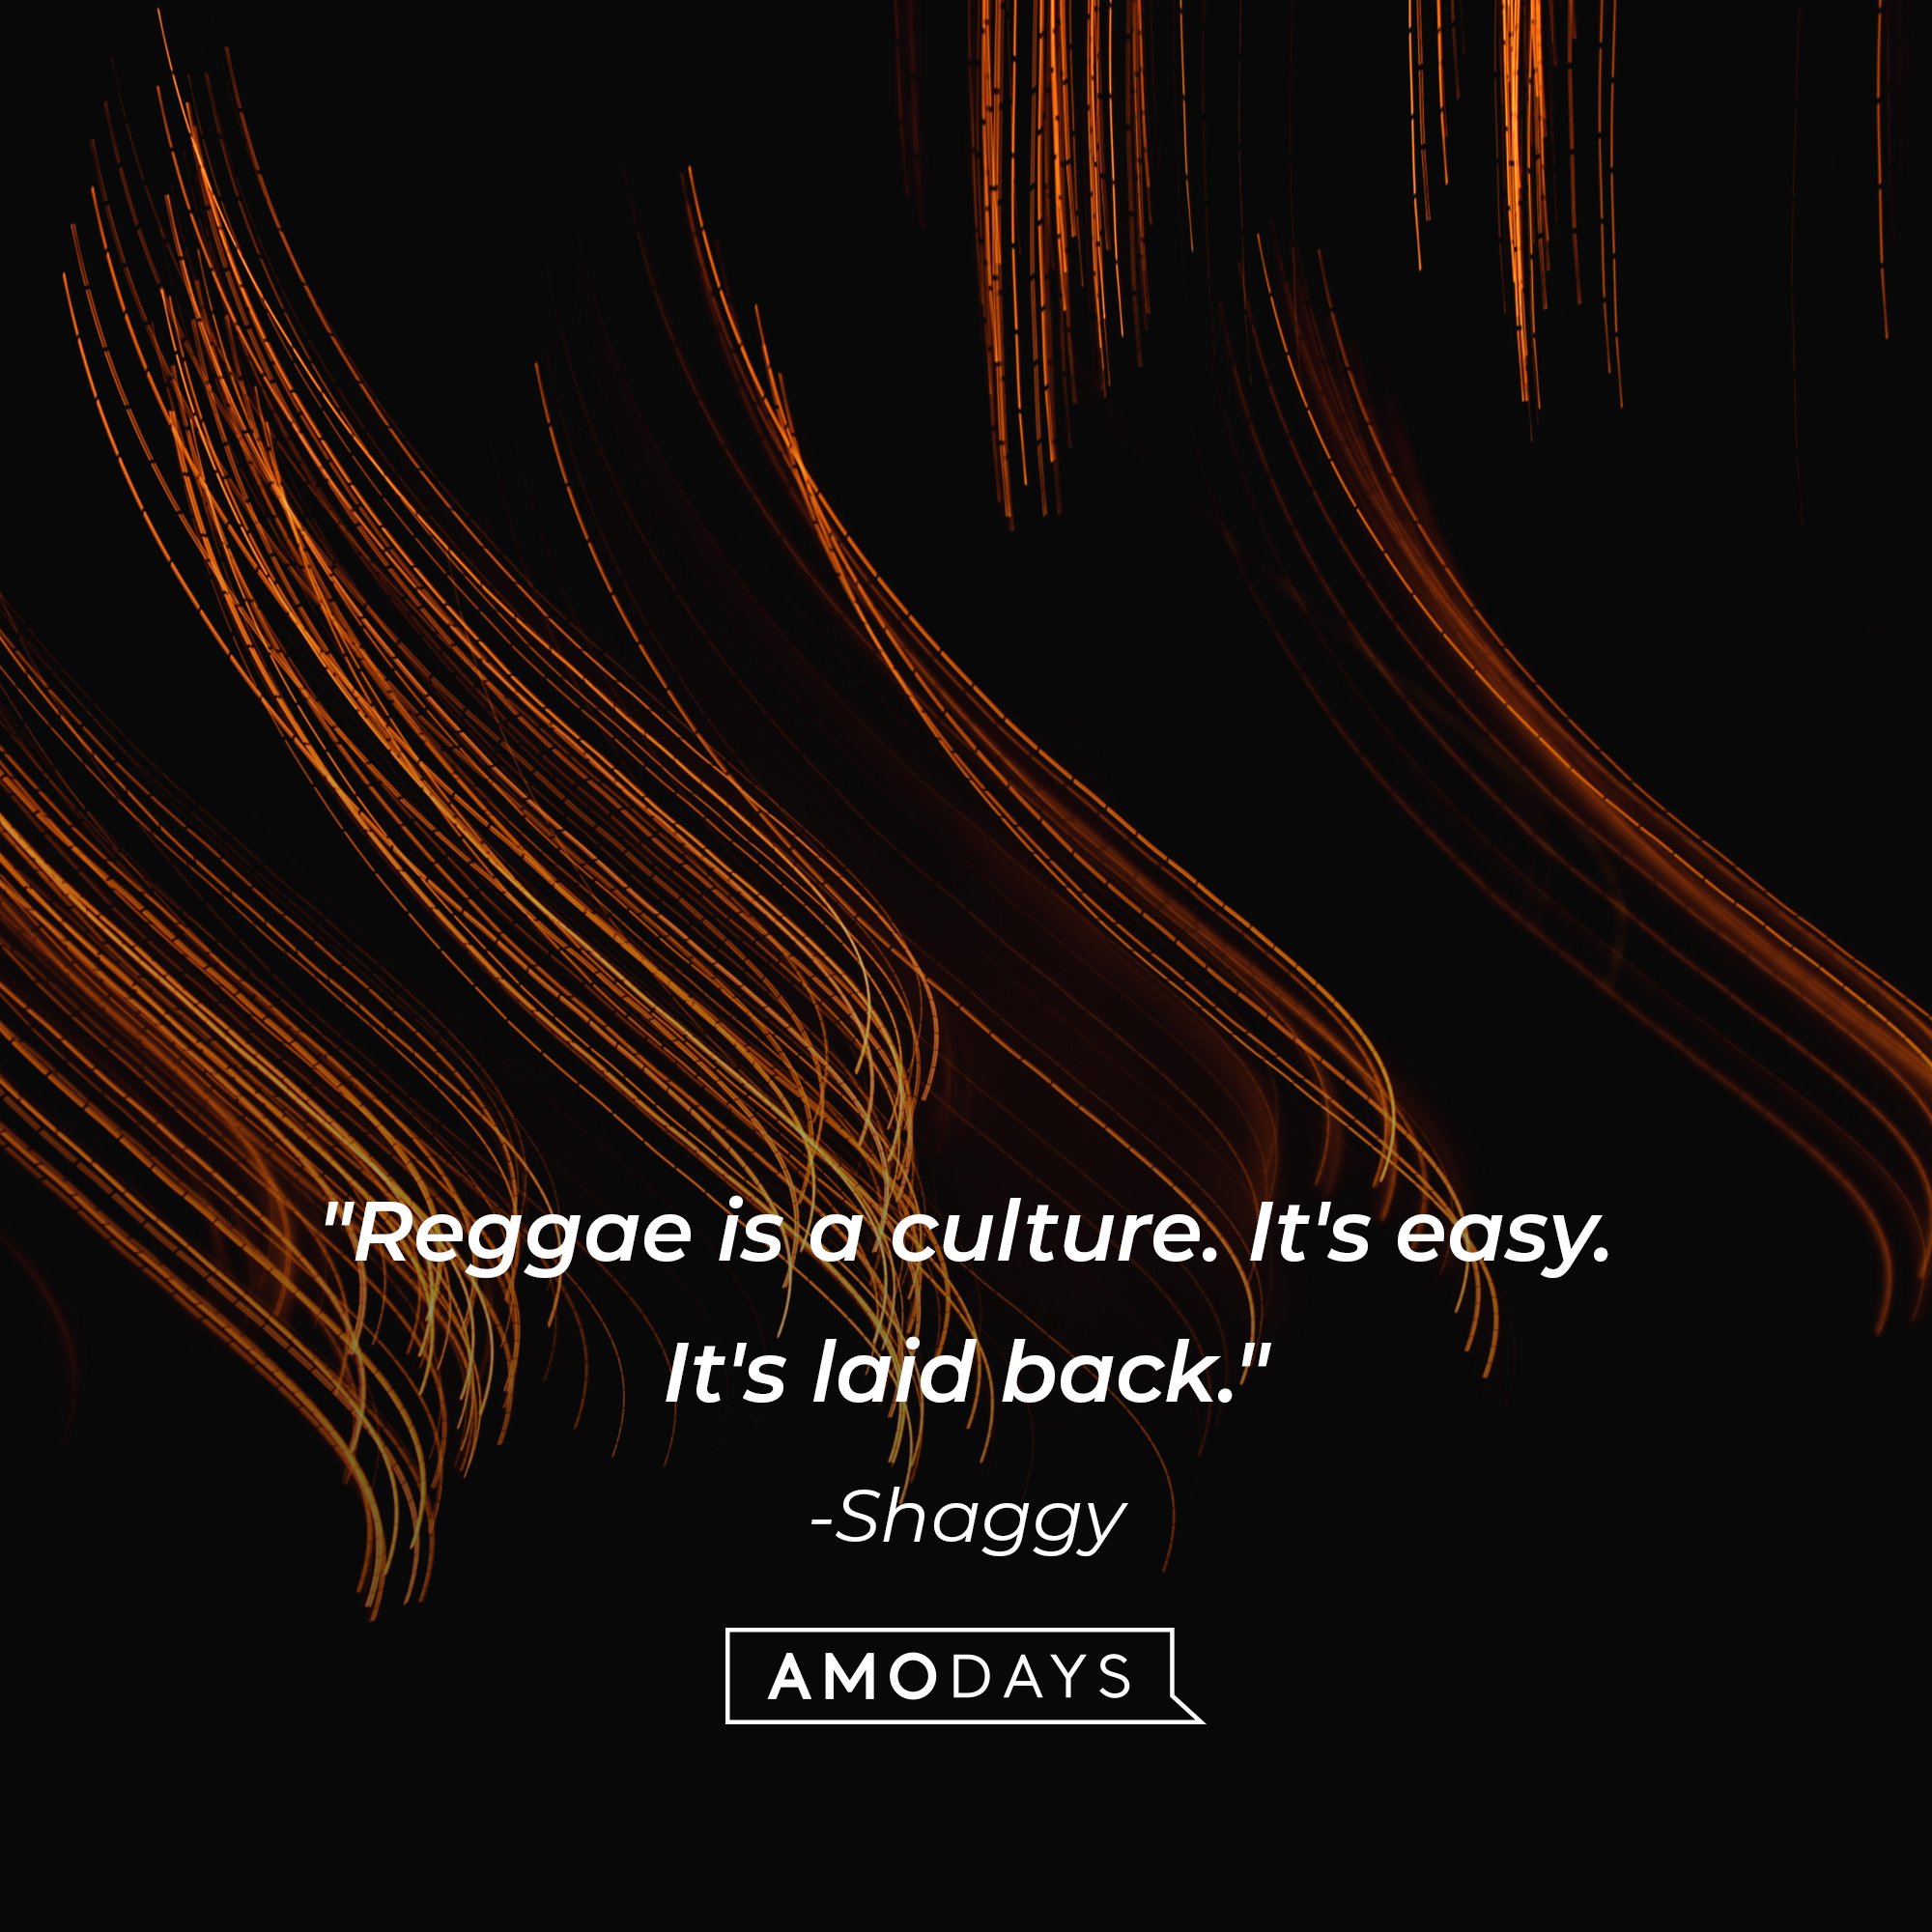 Shaggy's quote: "Reggae is a culture. It's easy. It's laid back." | Image: AmoDays